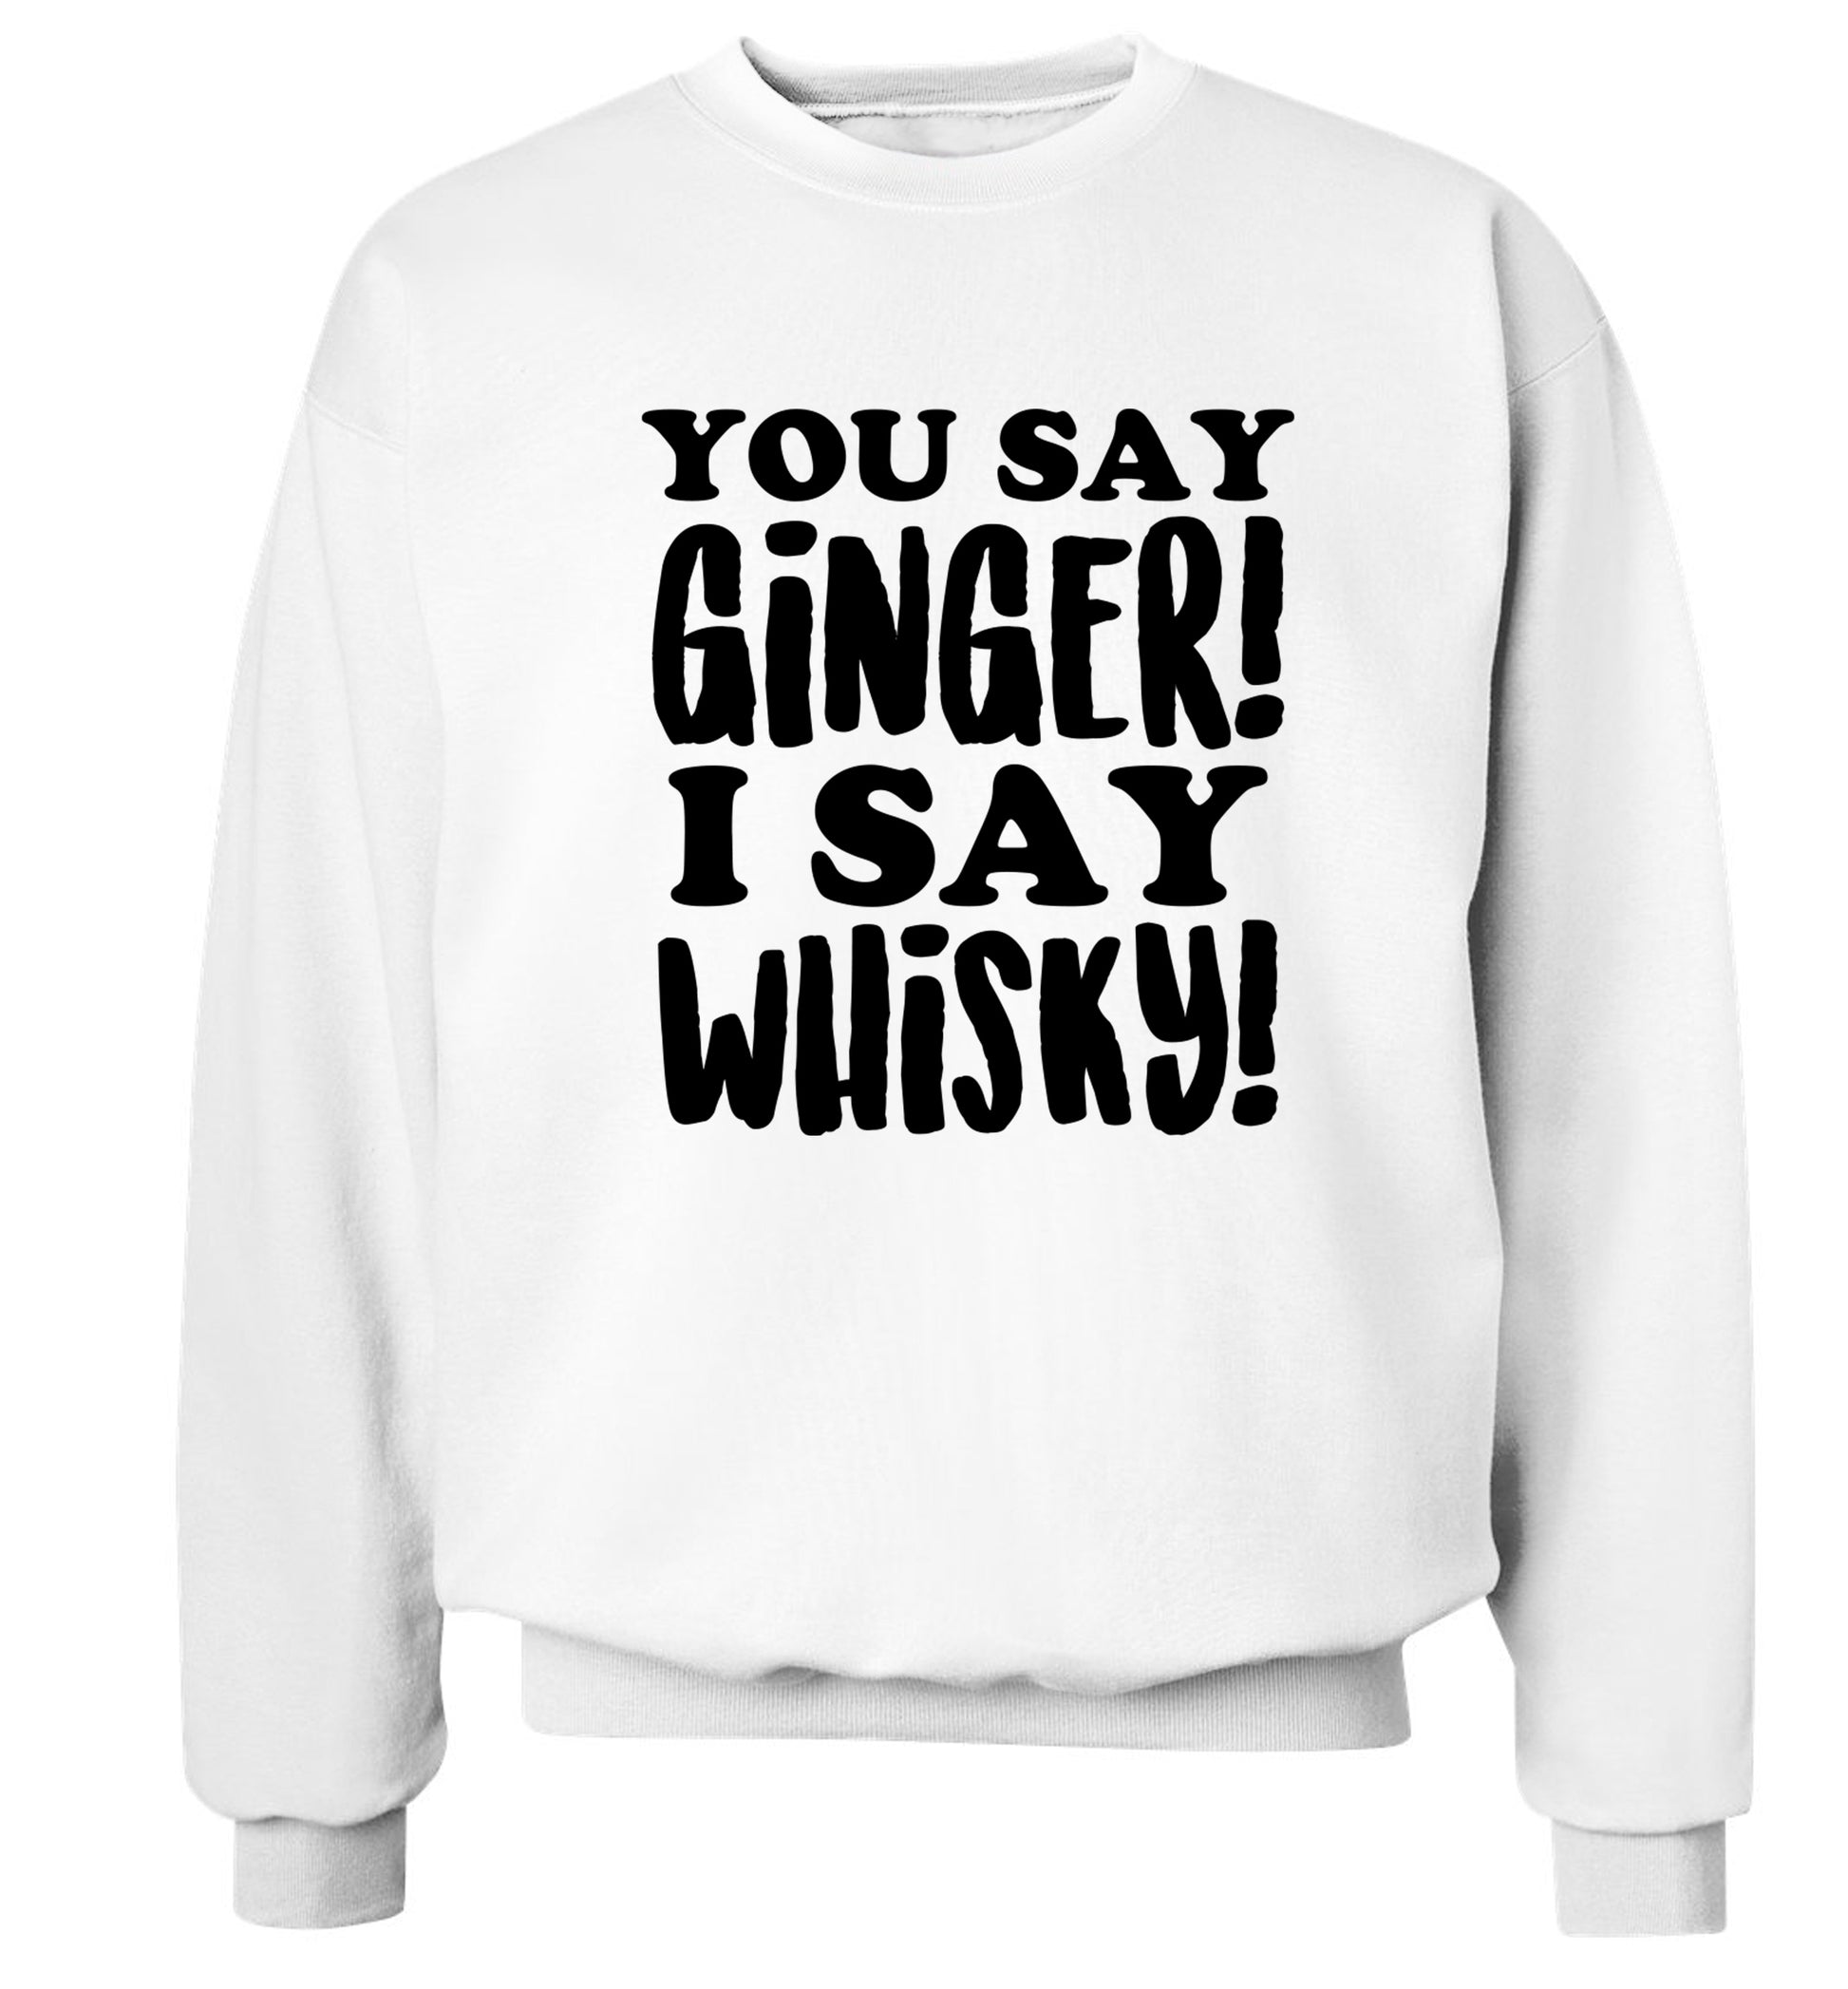 You say ginger I say whisky! Adult's unisex white Sweater 2XL